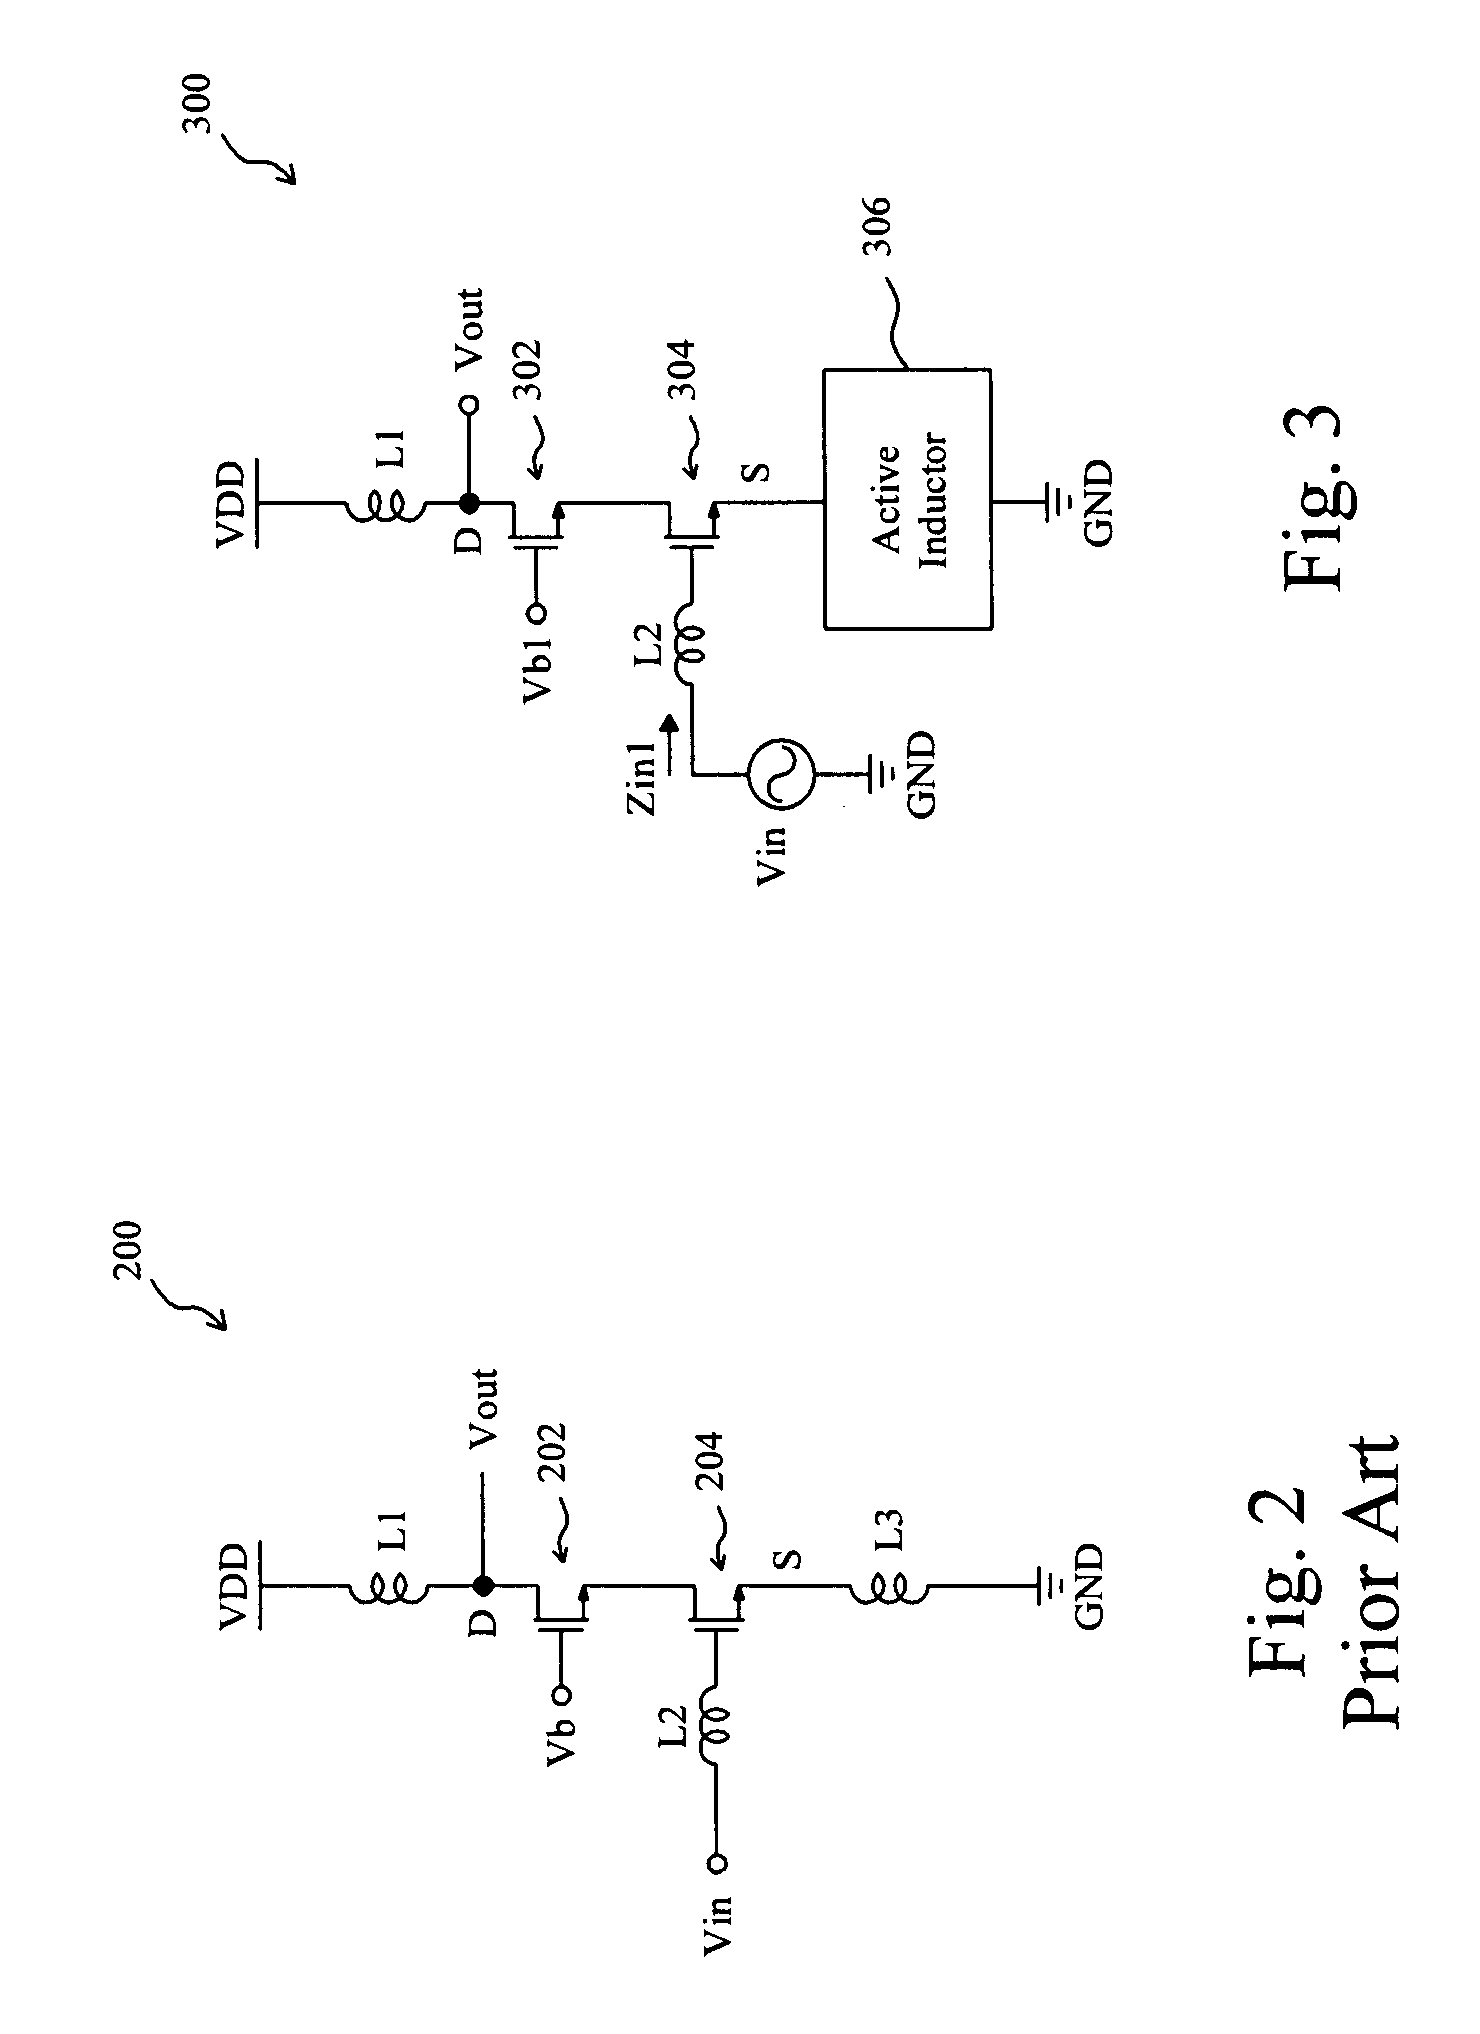 Cascode low noise amplifier with a source coupled active inductor